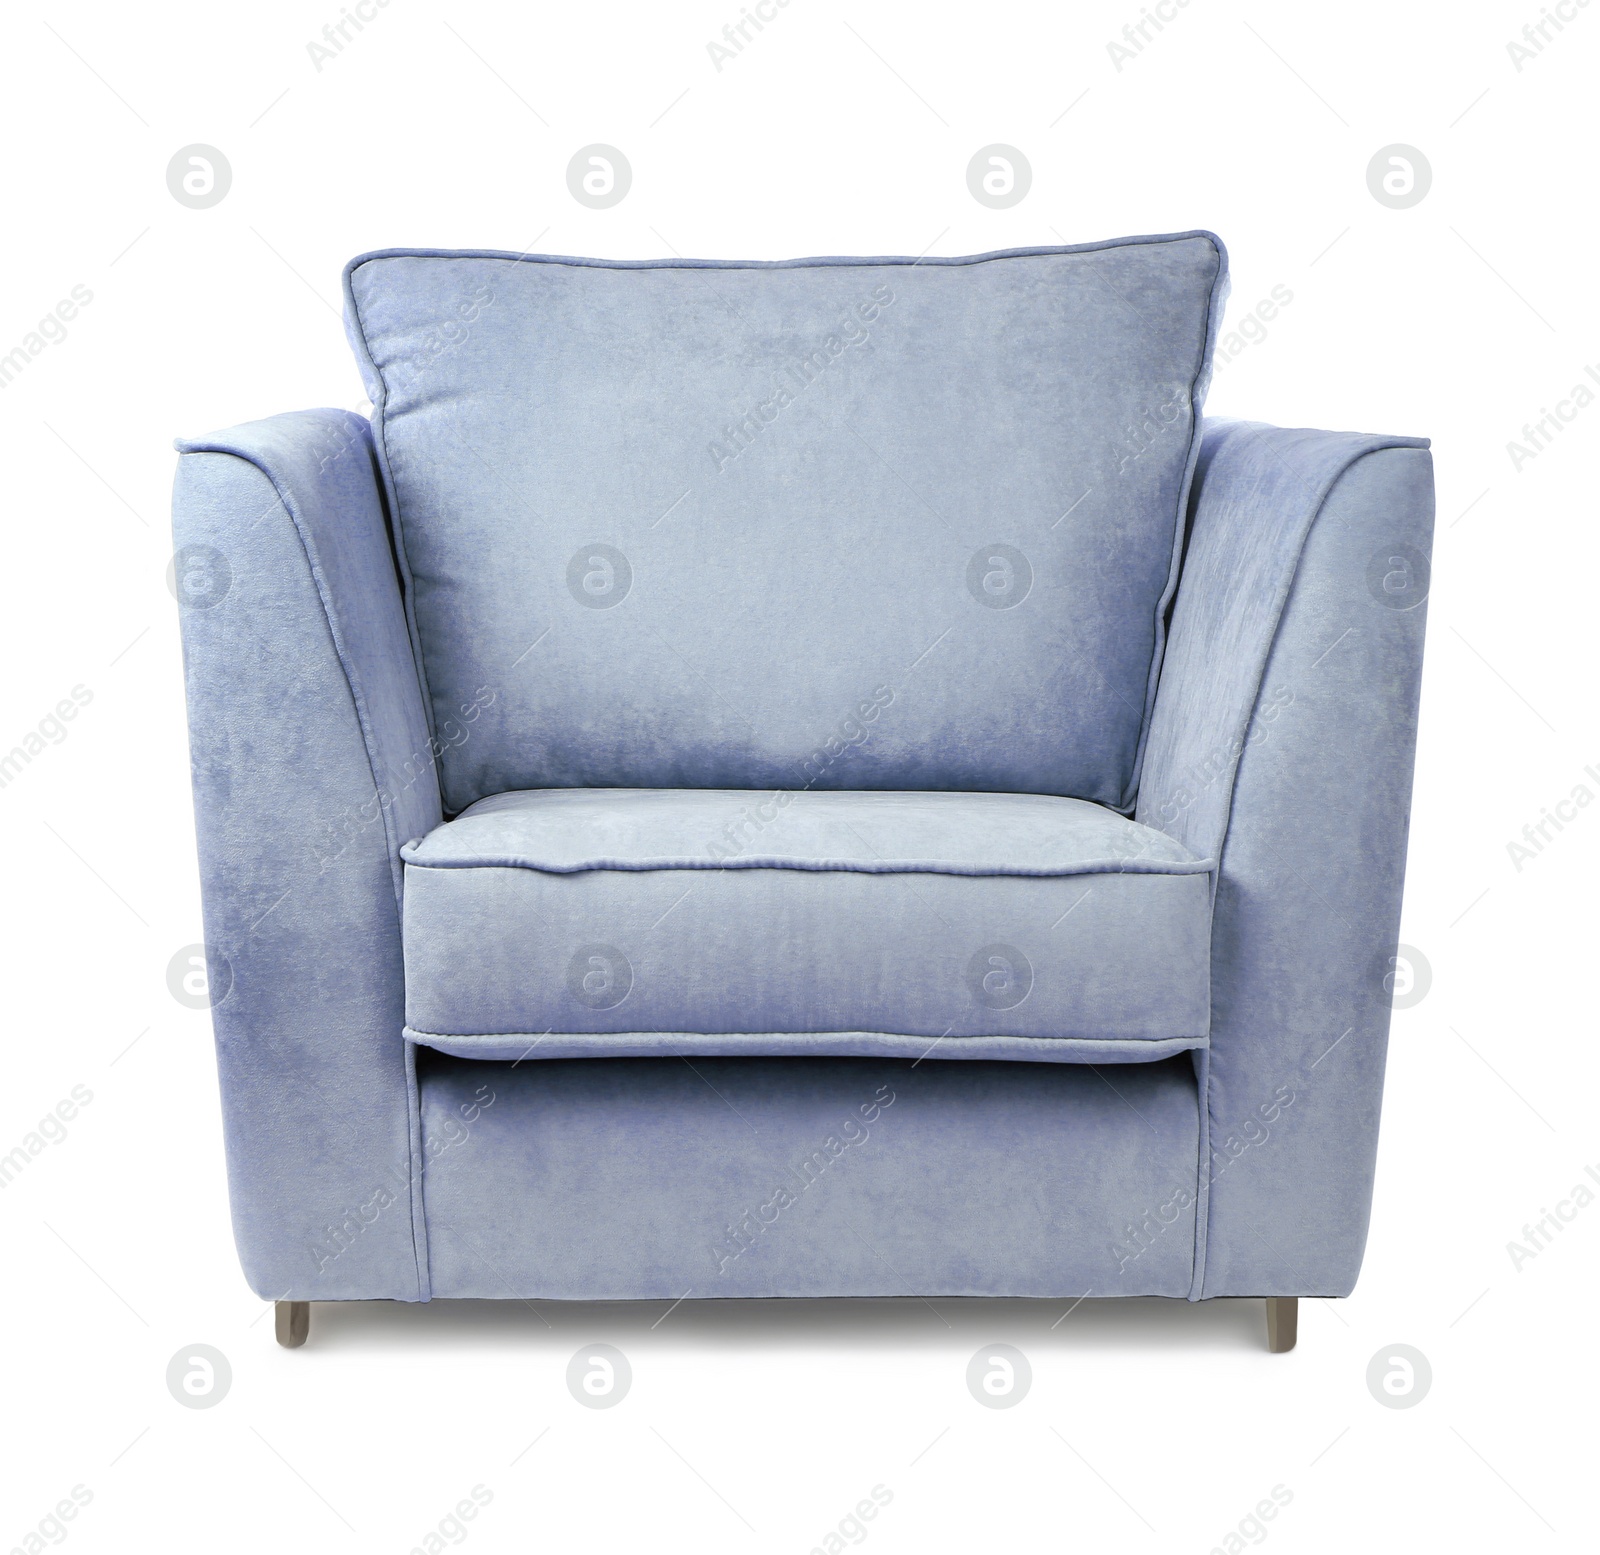 Image of One comfortable soft blue armchair isolated on white